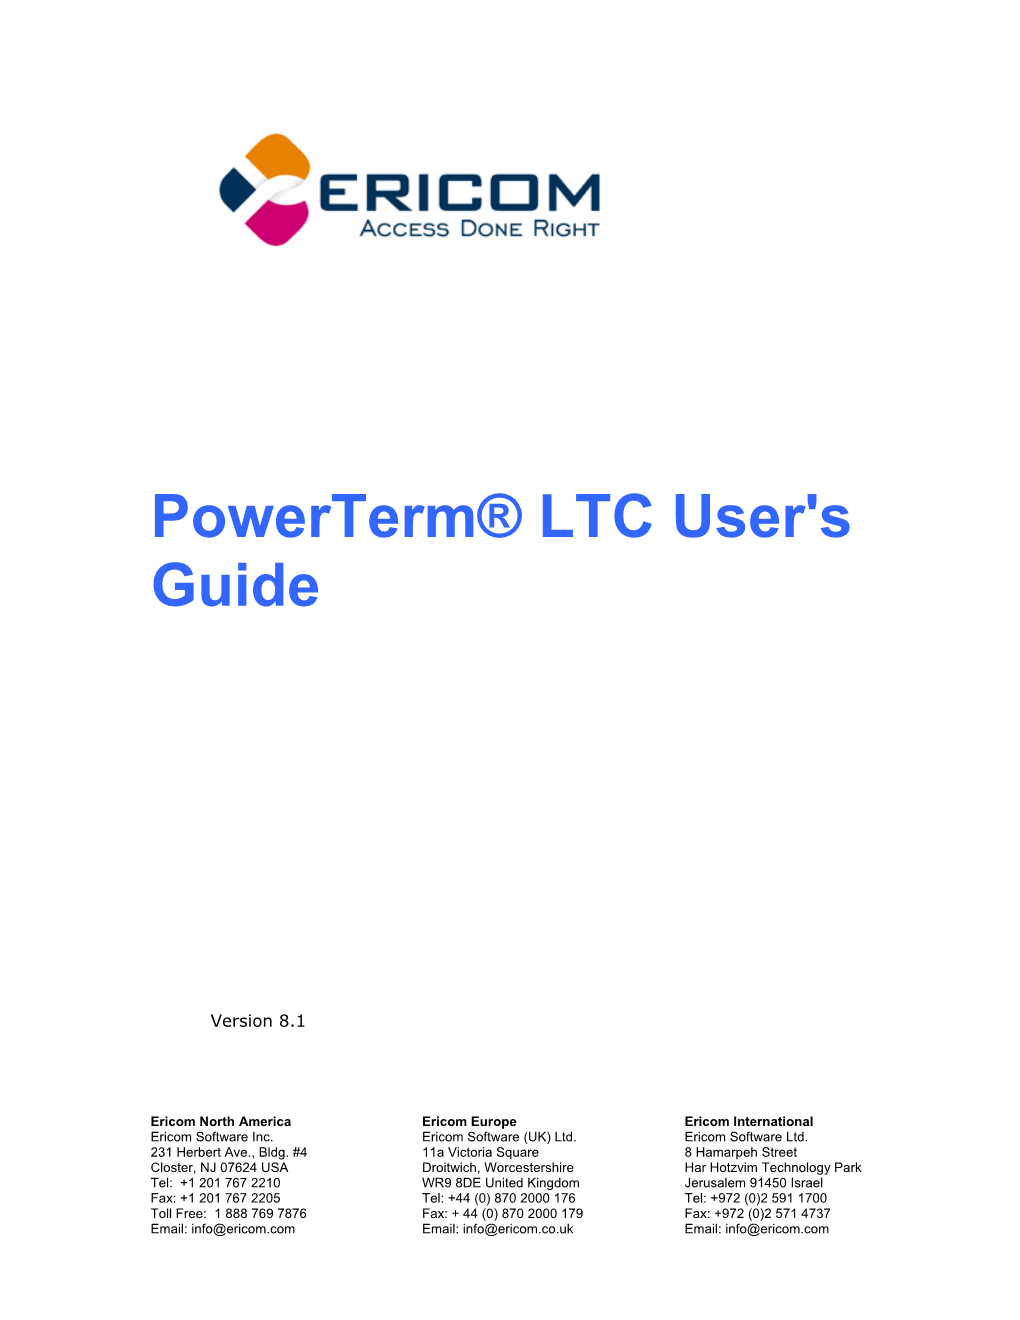 Powerterm LTC User's Guide Is Comprised of the Following Chapters